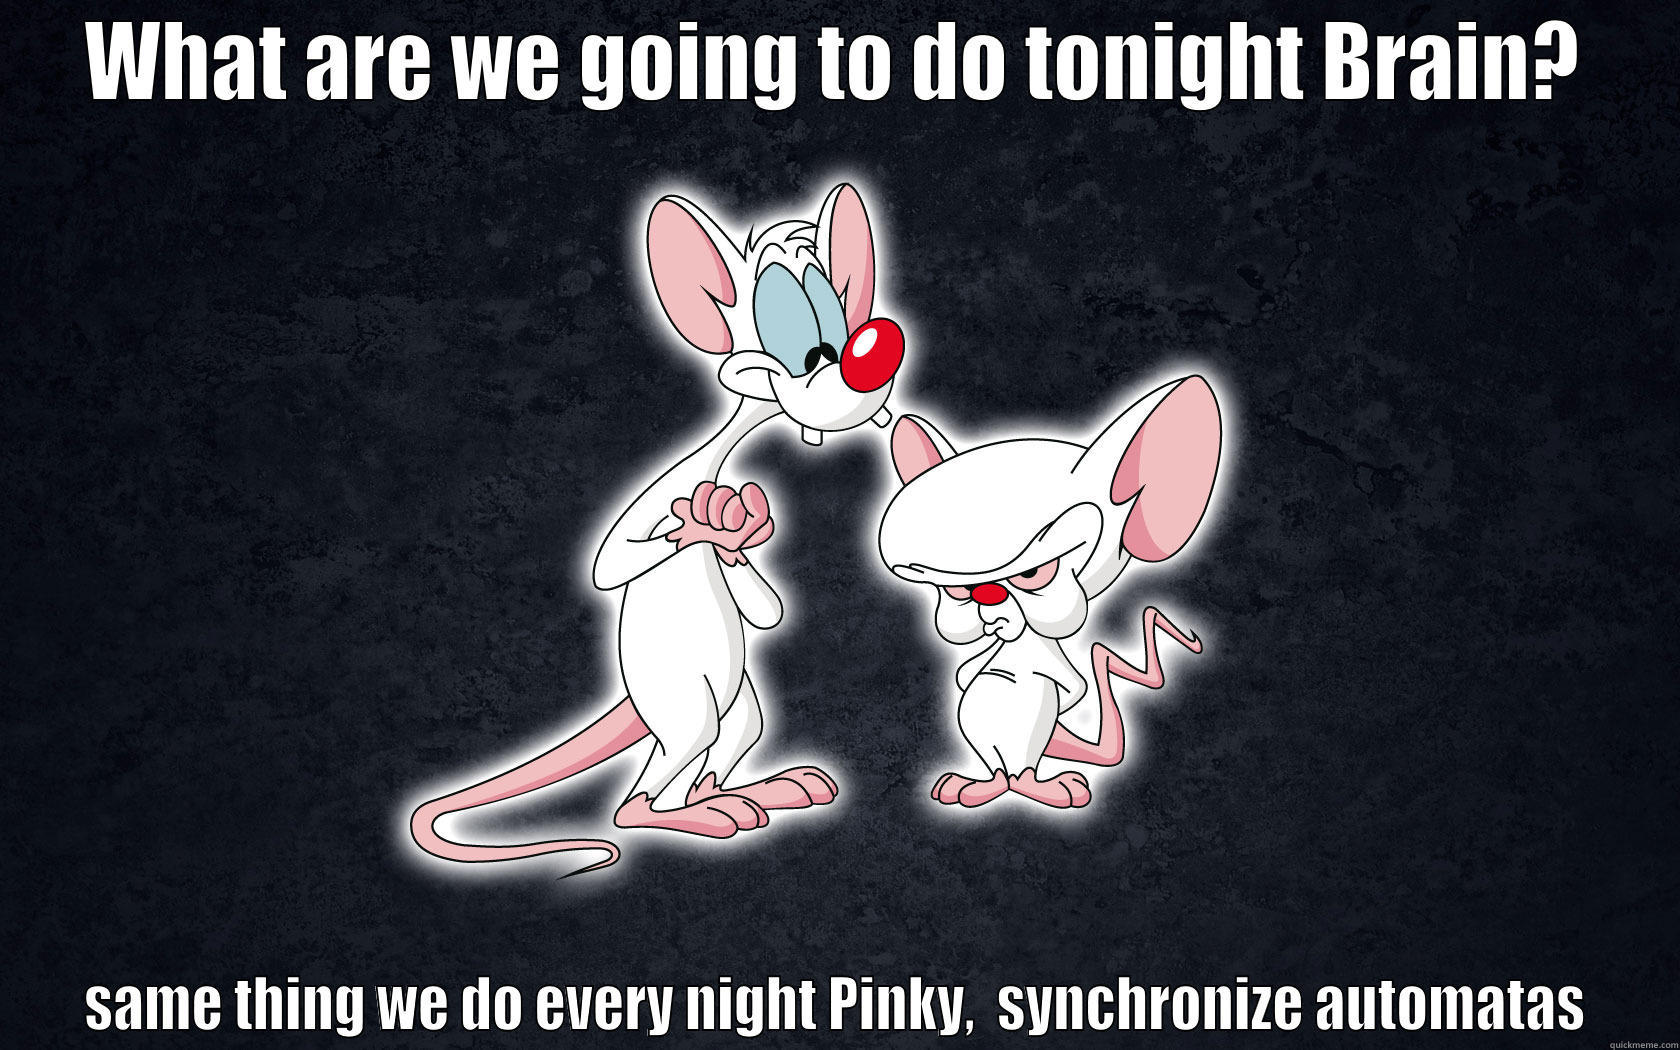 Pinky and Brain synchronize automas - WHAT ARE WE GOING TO DO TONIGHT BRAIN? SAME THING WE DO EVERY NIGHT PINKY,  SYNCHRONIZE AUTOMATAS Misc